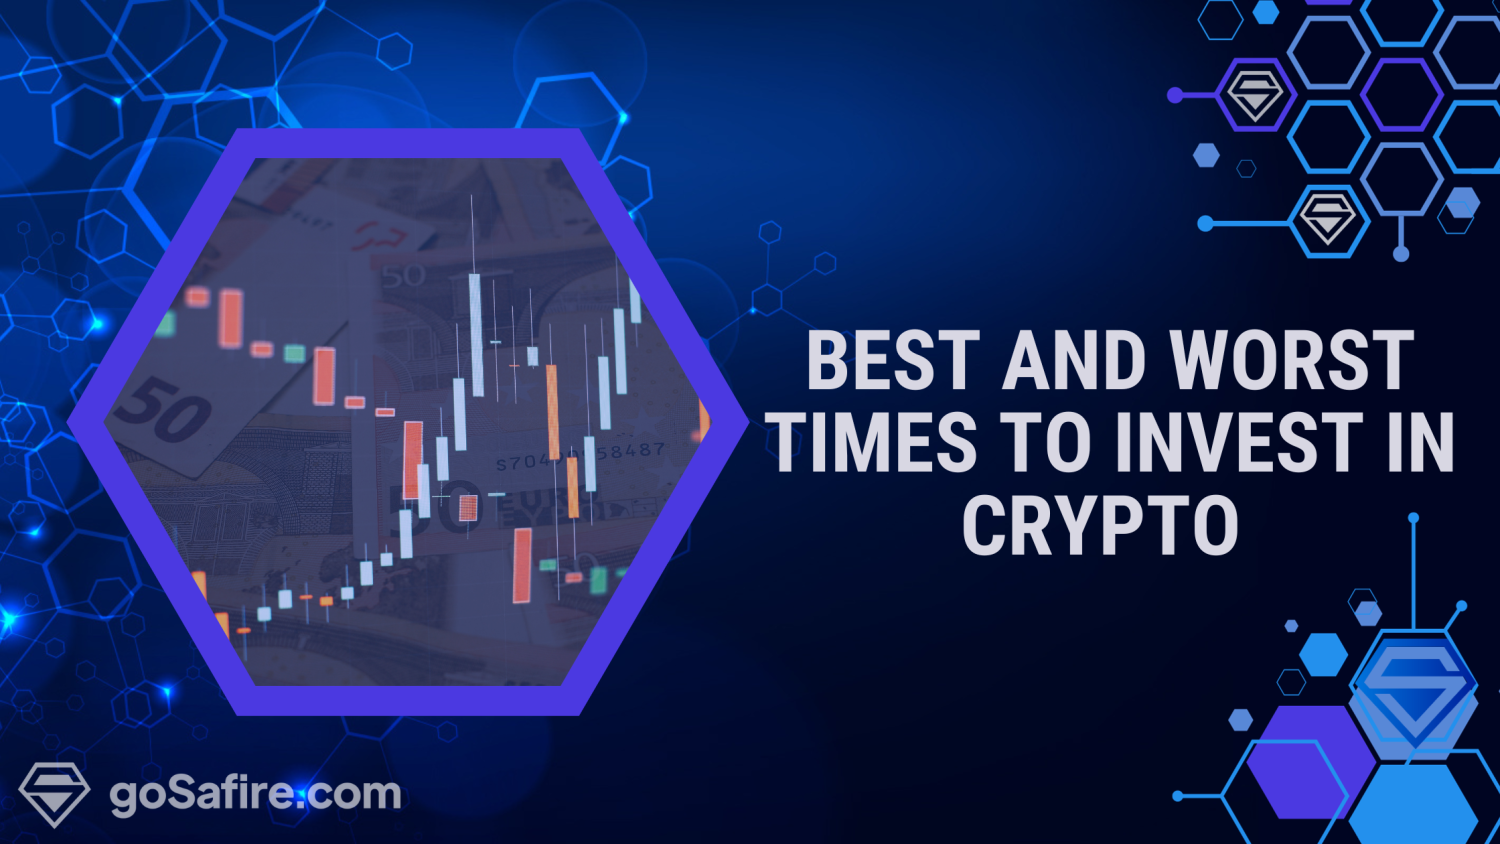 The Best and Worst Times to Invest and Trade in Cryptocurrency